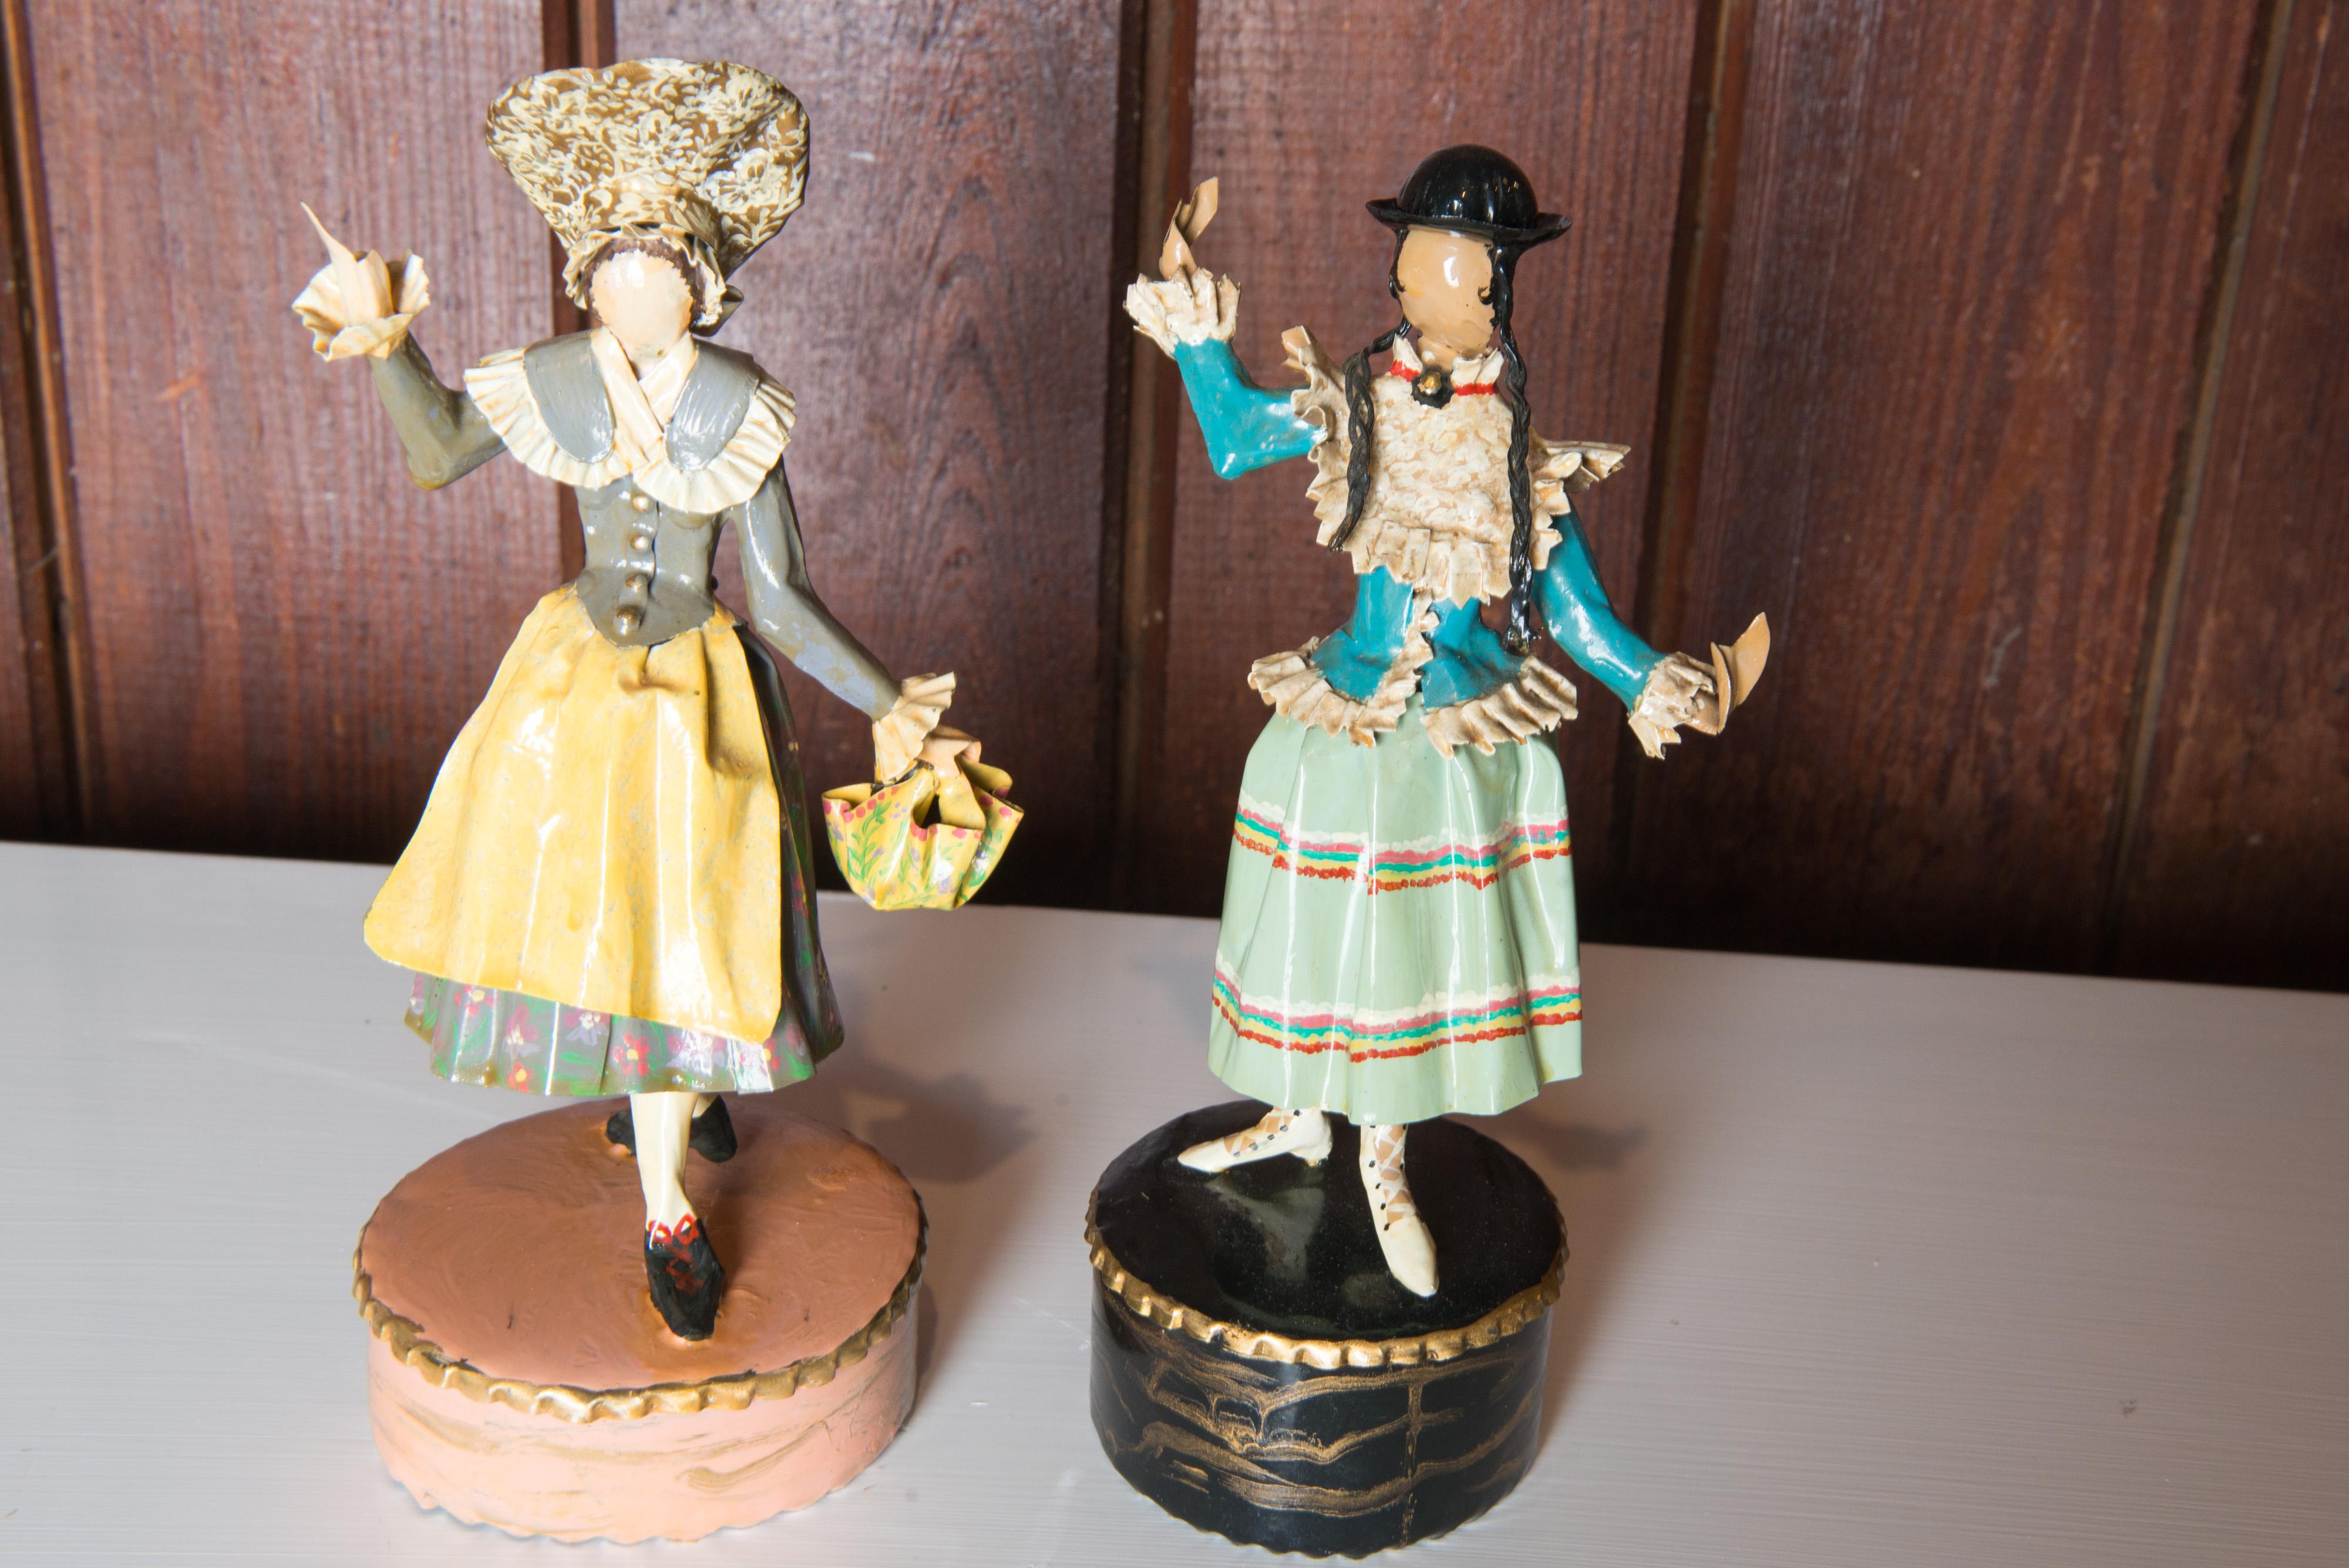 Lee Menichetti, (1931-1997), New York & Palm Beach, well known mid-century artist known for his theatre related art. These sculptures are made of hand bent and hand painted sheet brass. One figure in a dirndl skirt and a bowler hat. The other in a